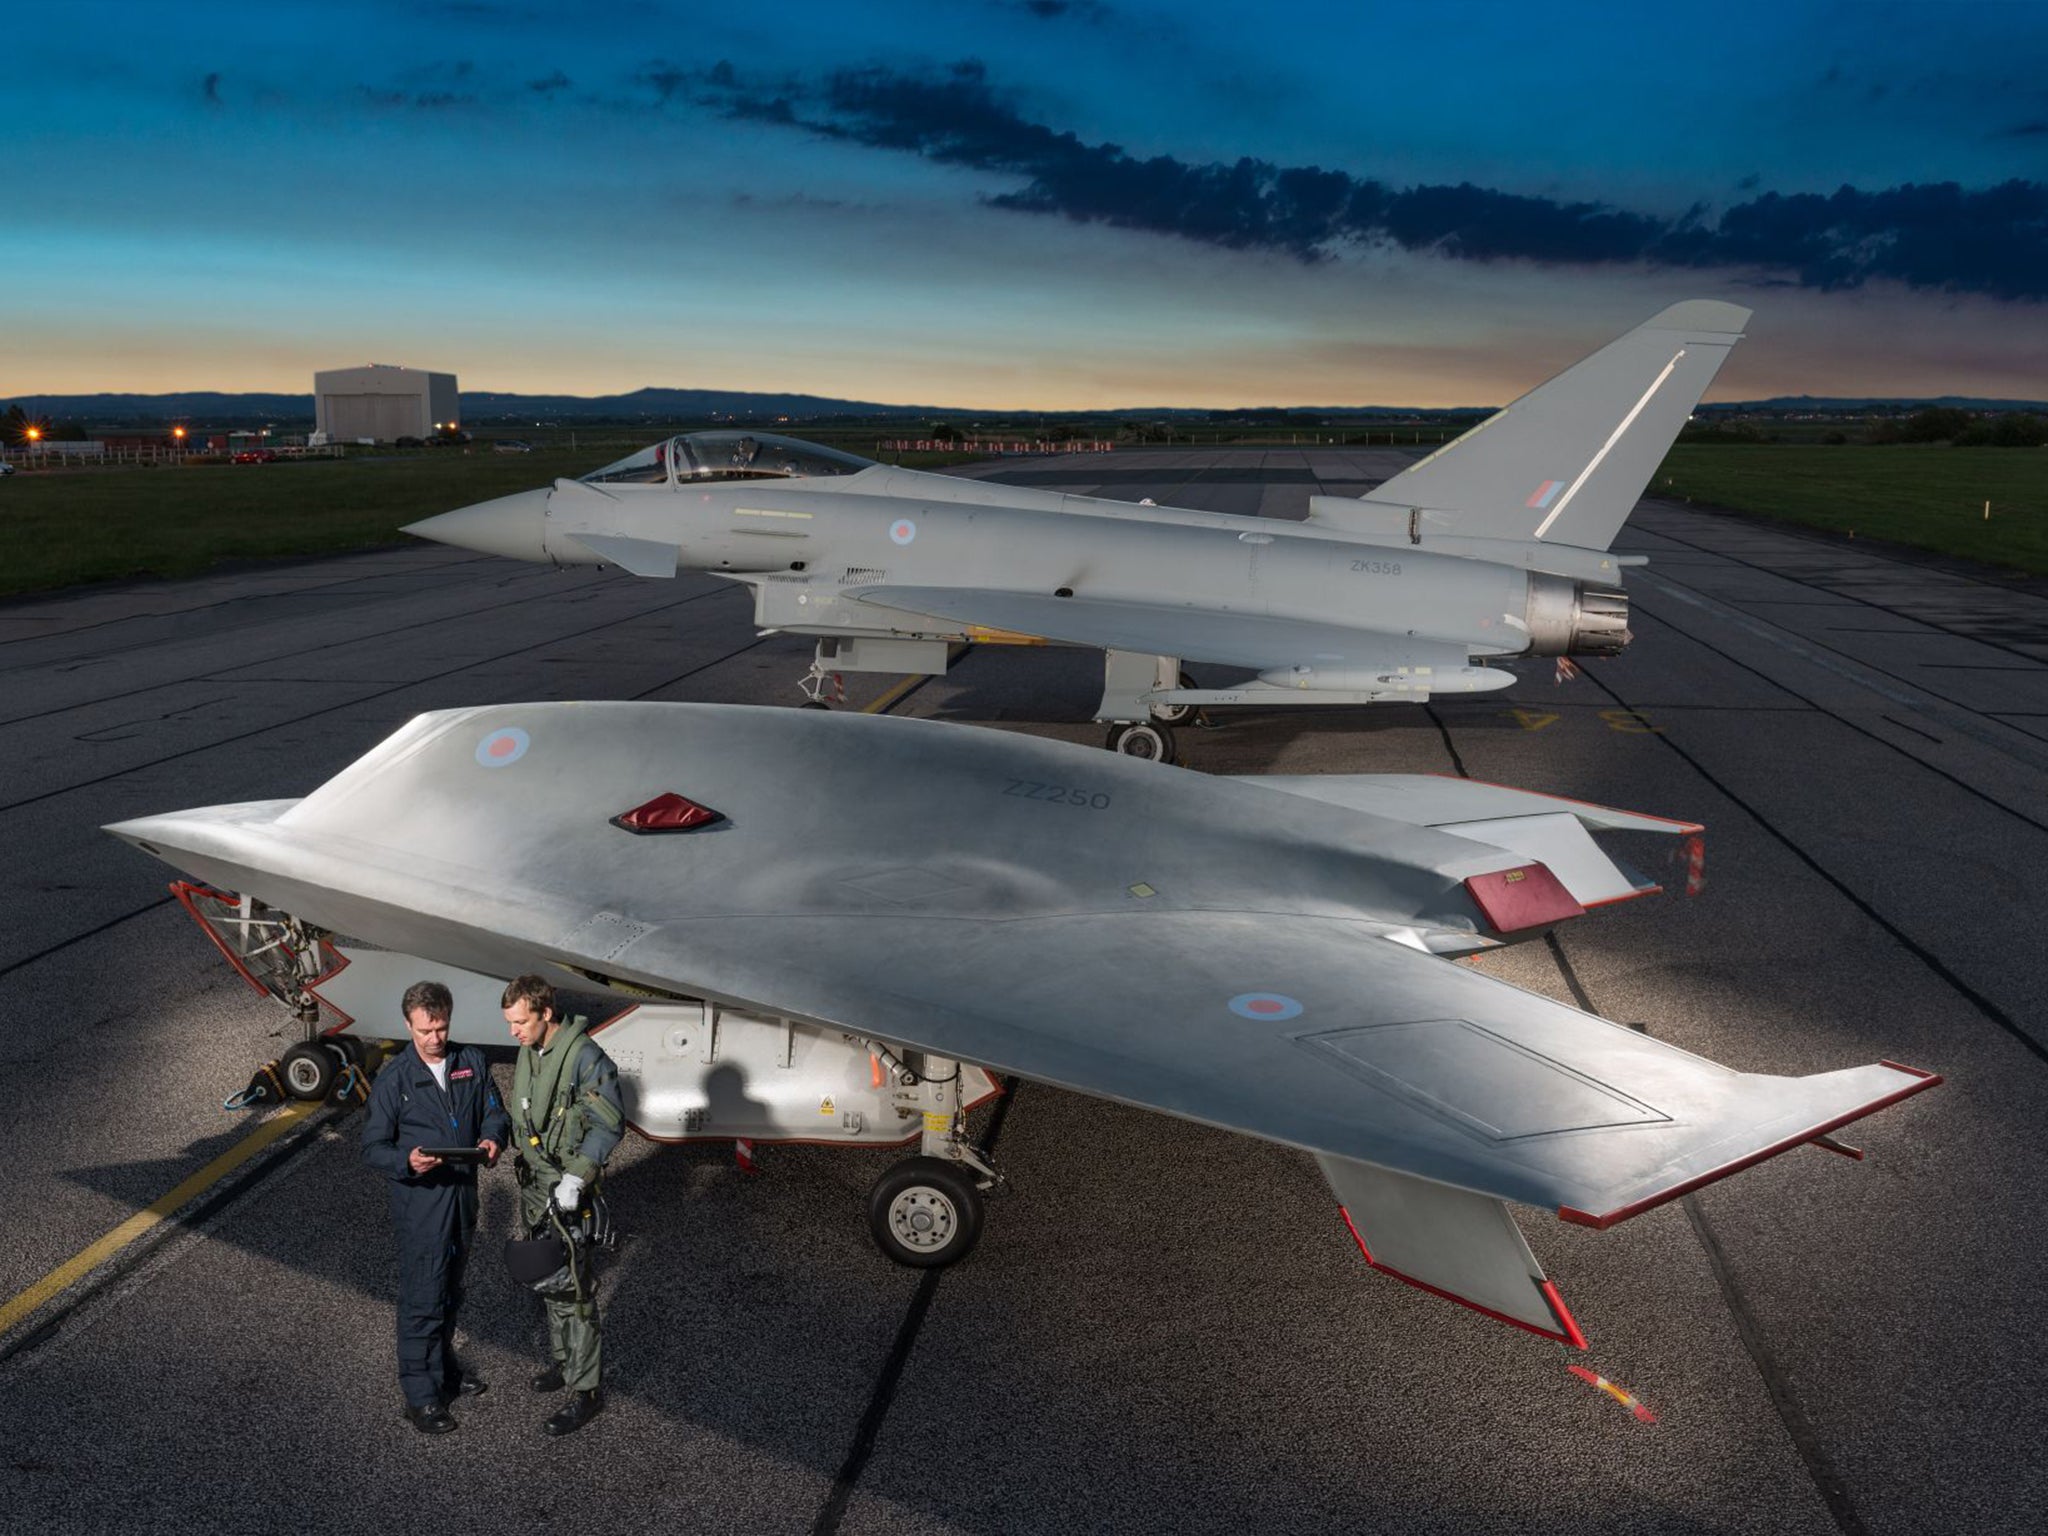 supplere Siege støn UK exporting drone components worth hundreds of millions in bid to regain  ground in global arms race | The Independent | The Independent